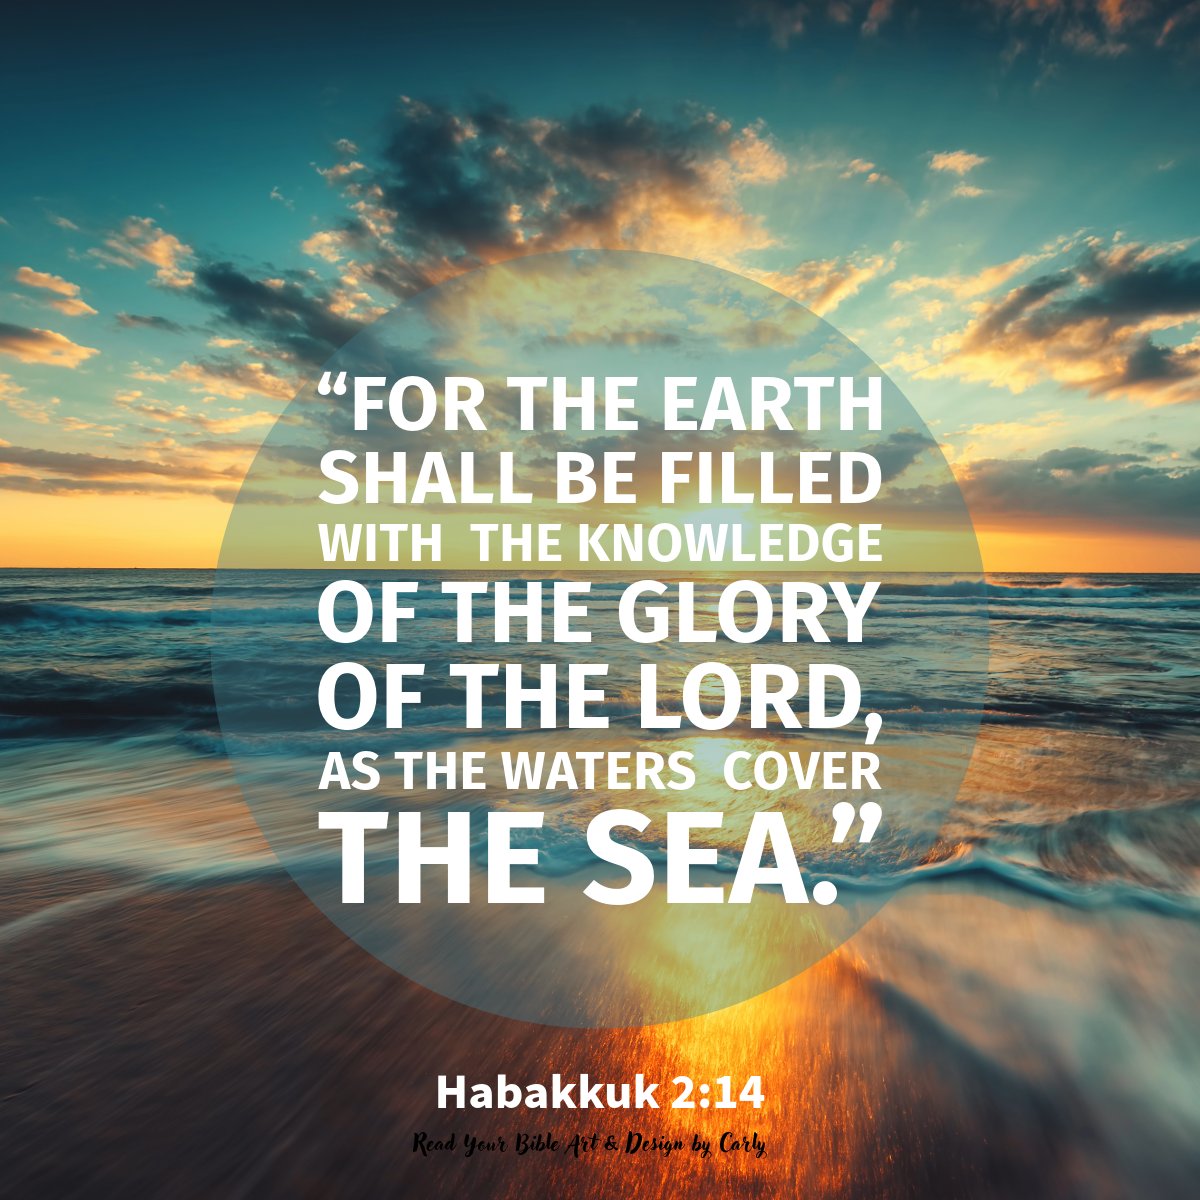 “For the earth shall be filled with the knowledge of the glory of the LORD, as the waters cover the sea.” Habakkuk 2:14 (KJV) 🙏